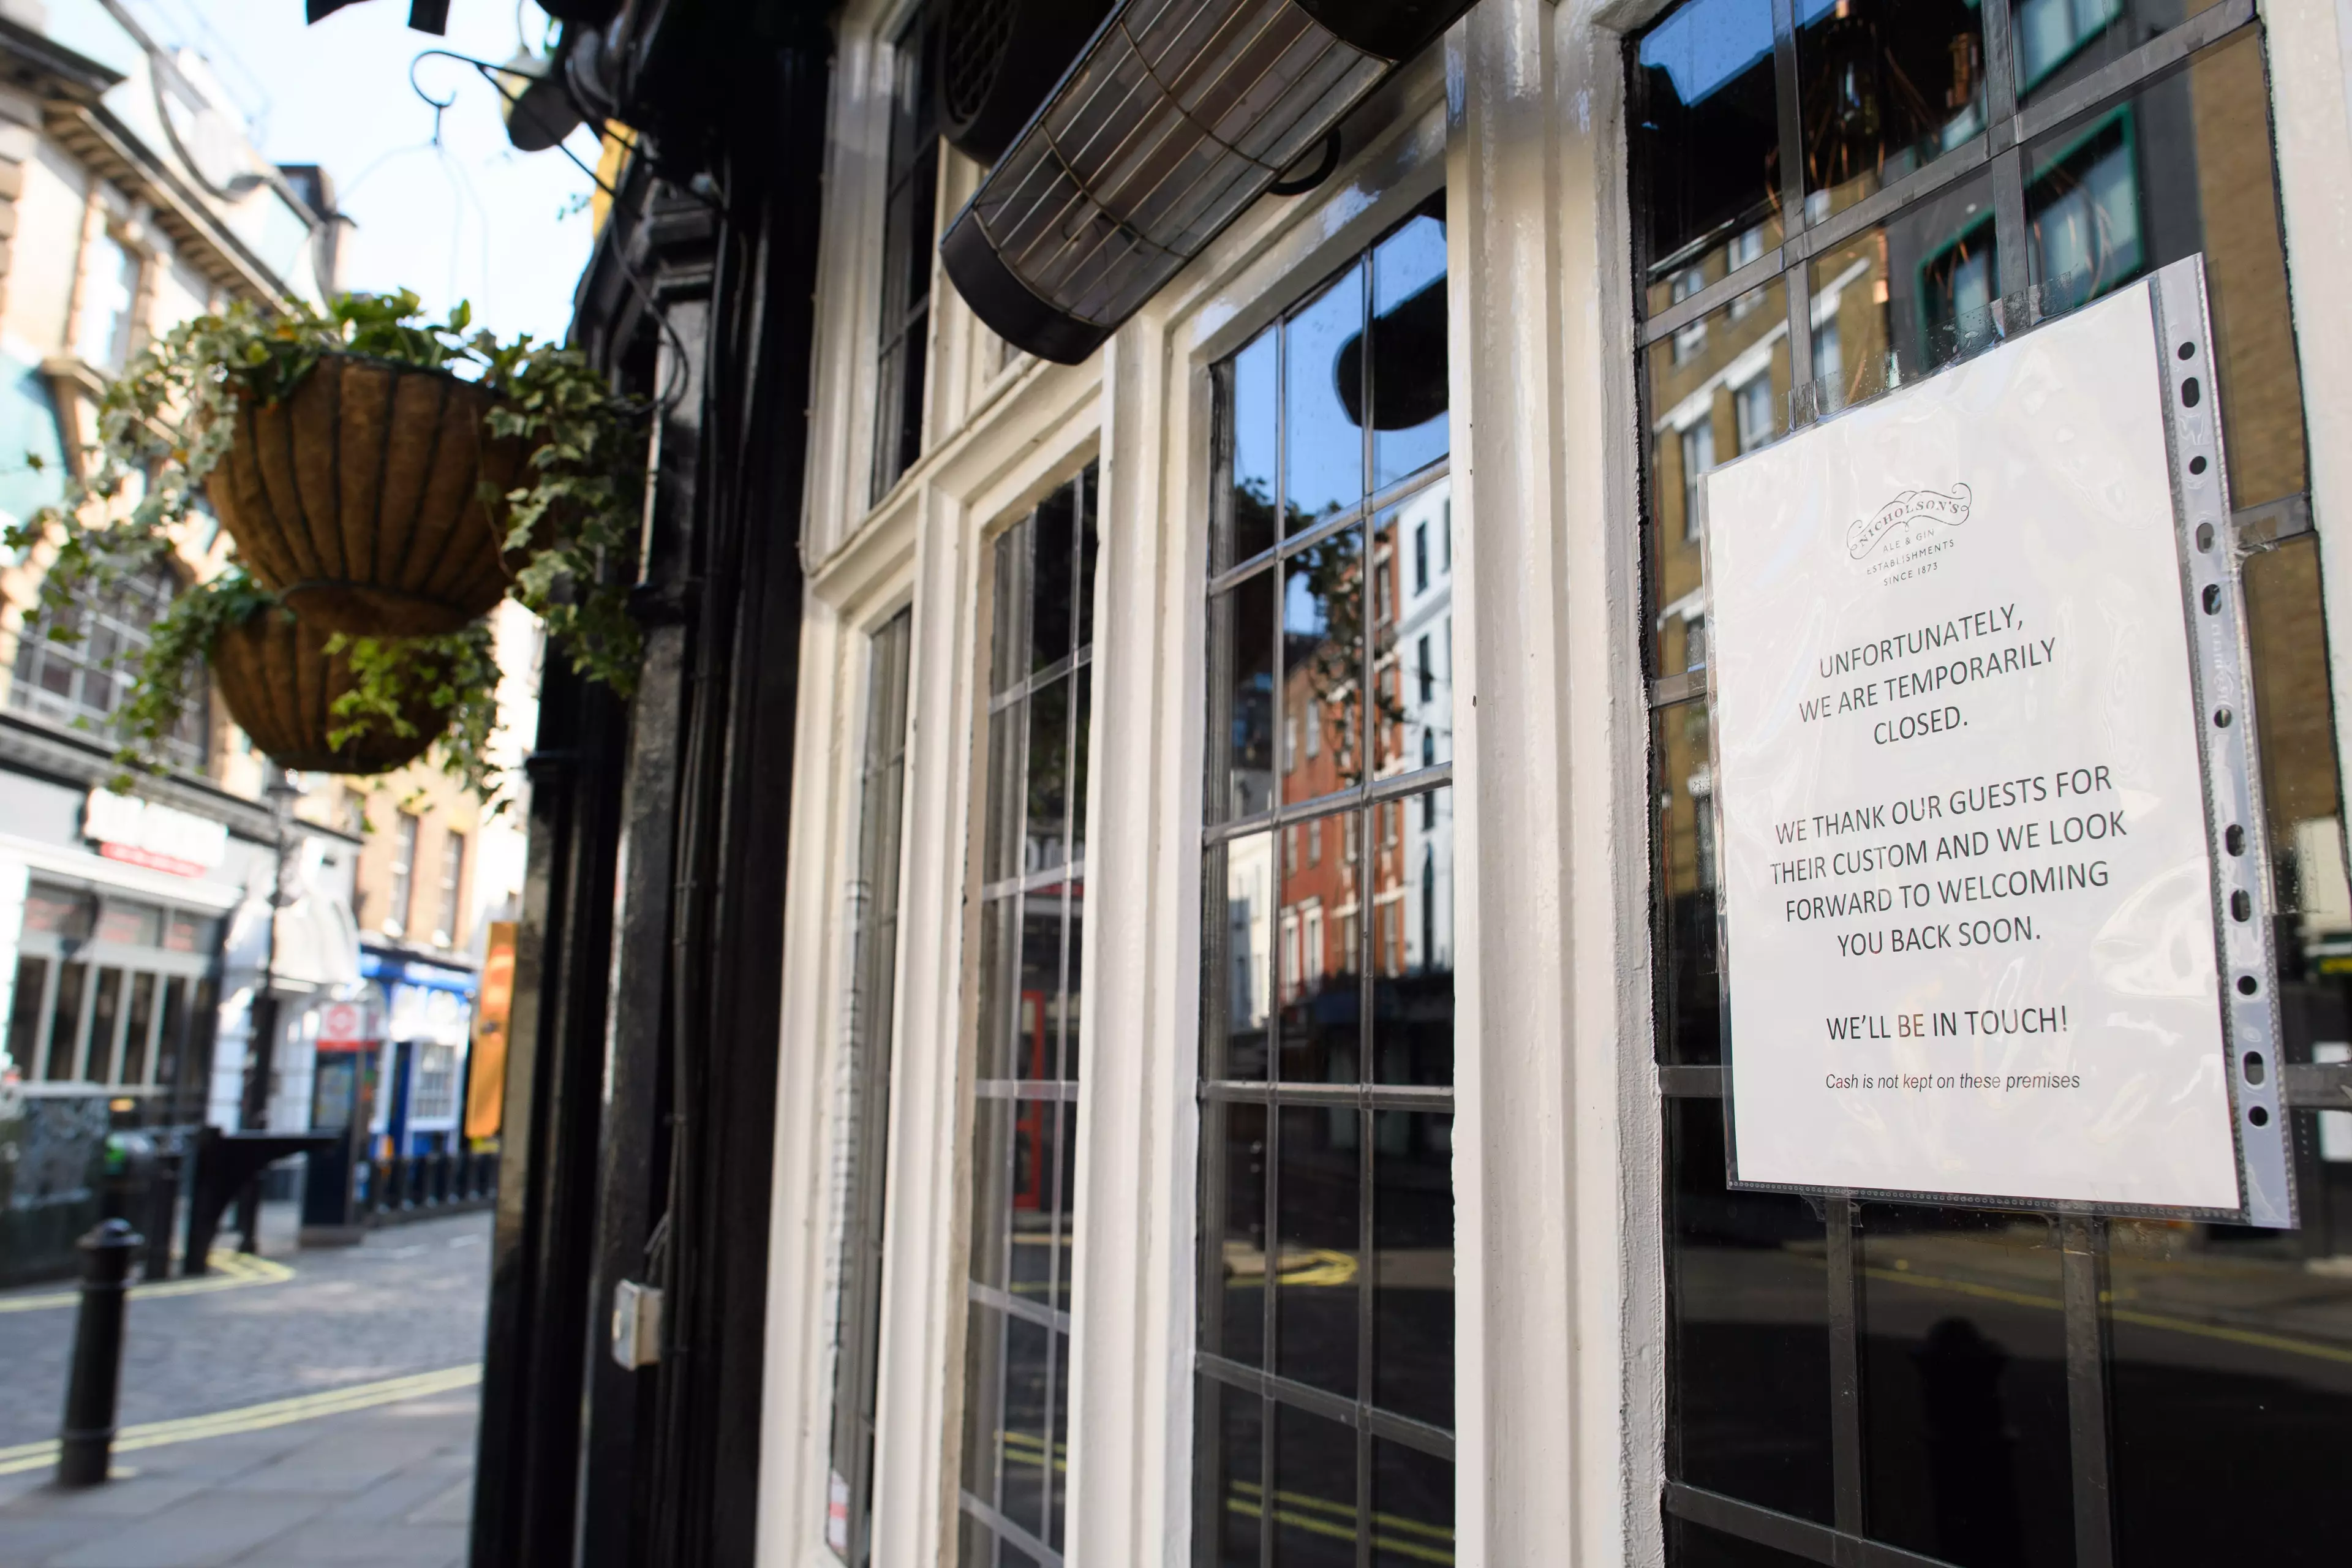 Pubs and bars were closed because of lockdown restrictions.